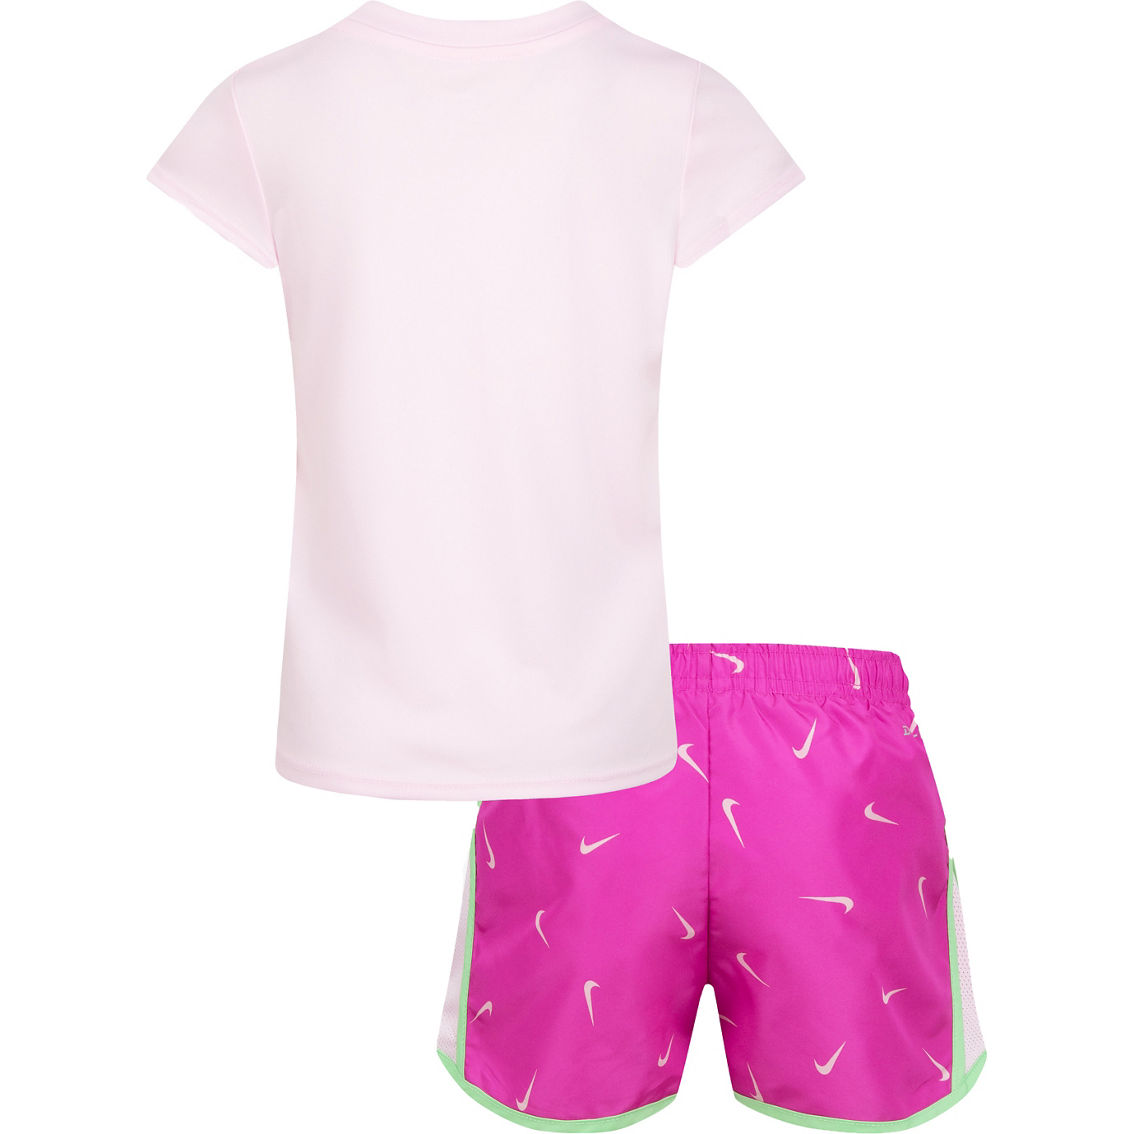 Nike Little Girls Dri-Fit Tee and Tempo Shorts 2 pc. Set - Image 2 of 8